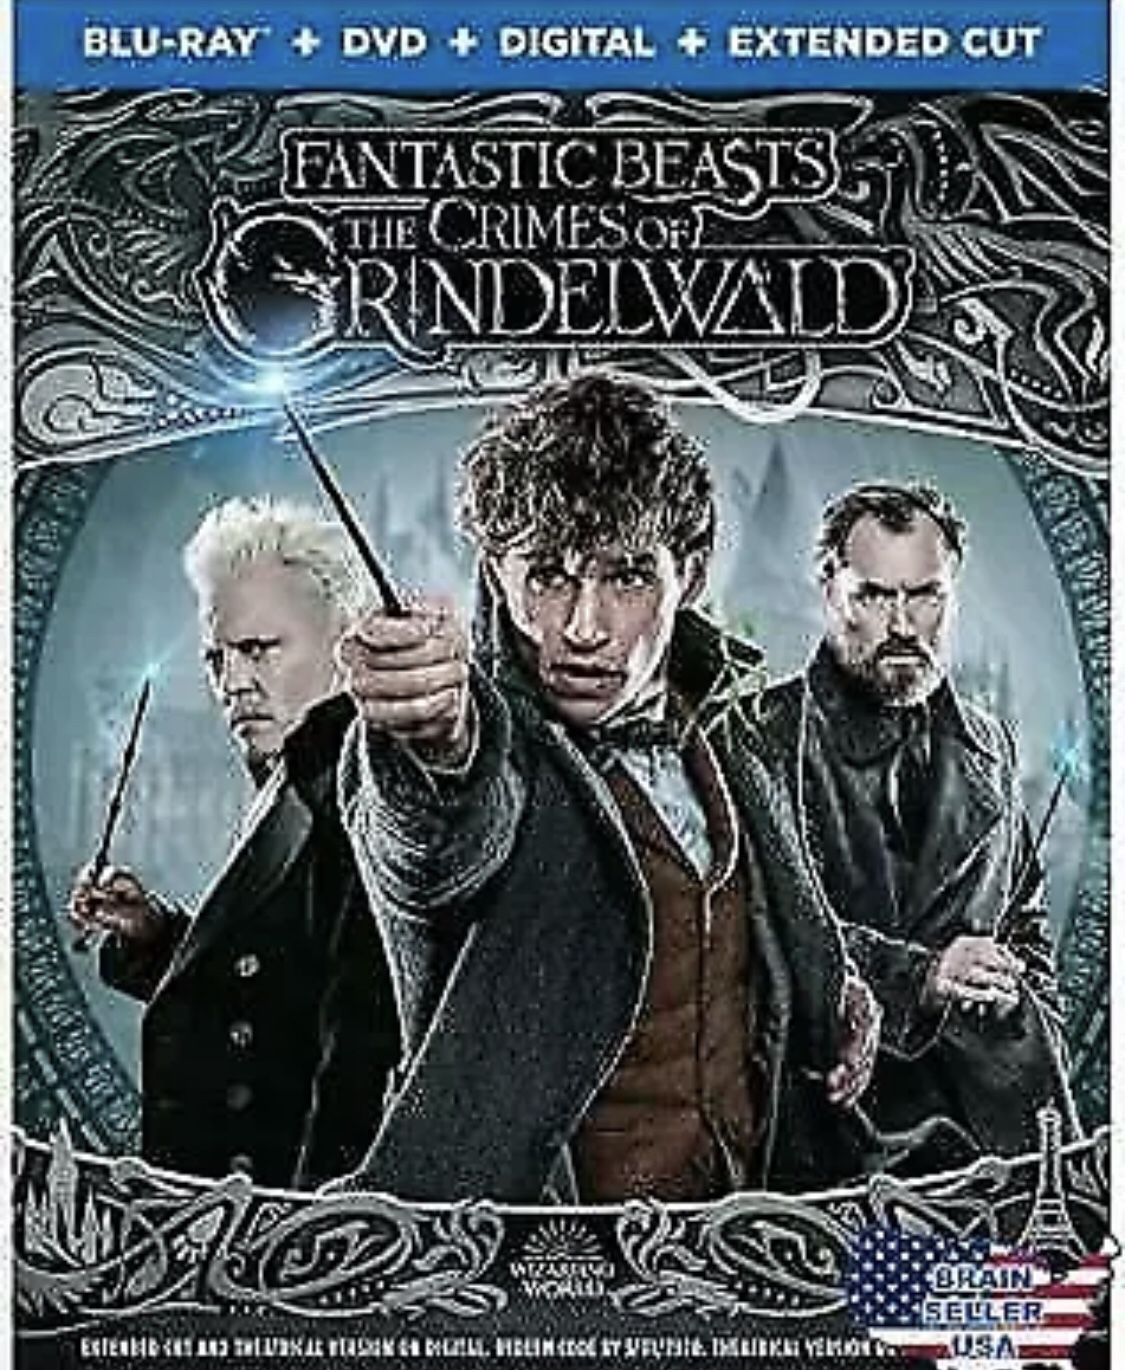 New Blu-ray DVD Fantastic Beasts The Crimes of Grindelwald